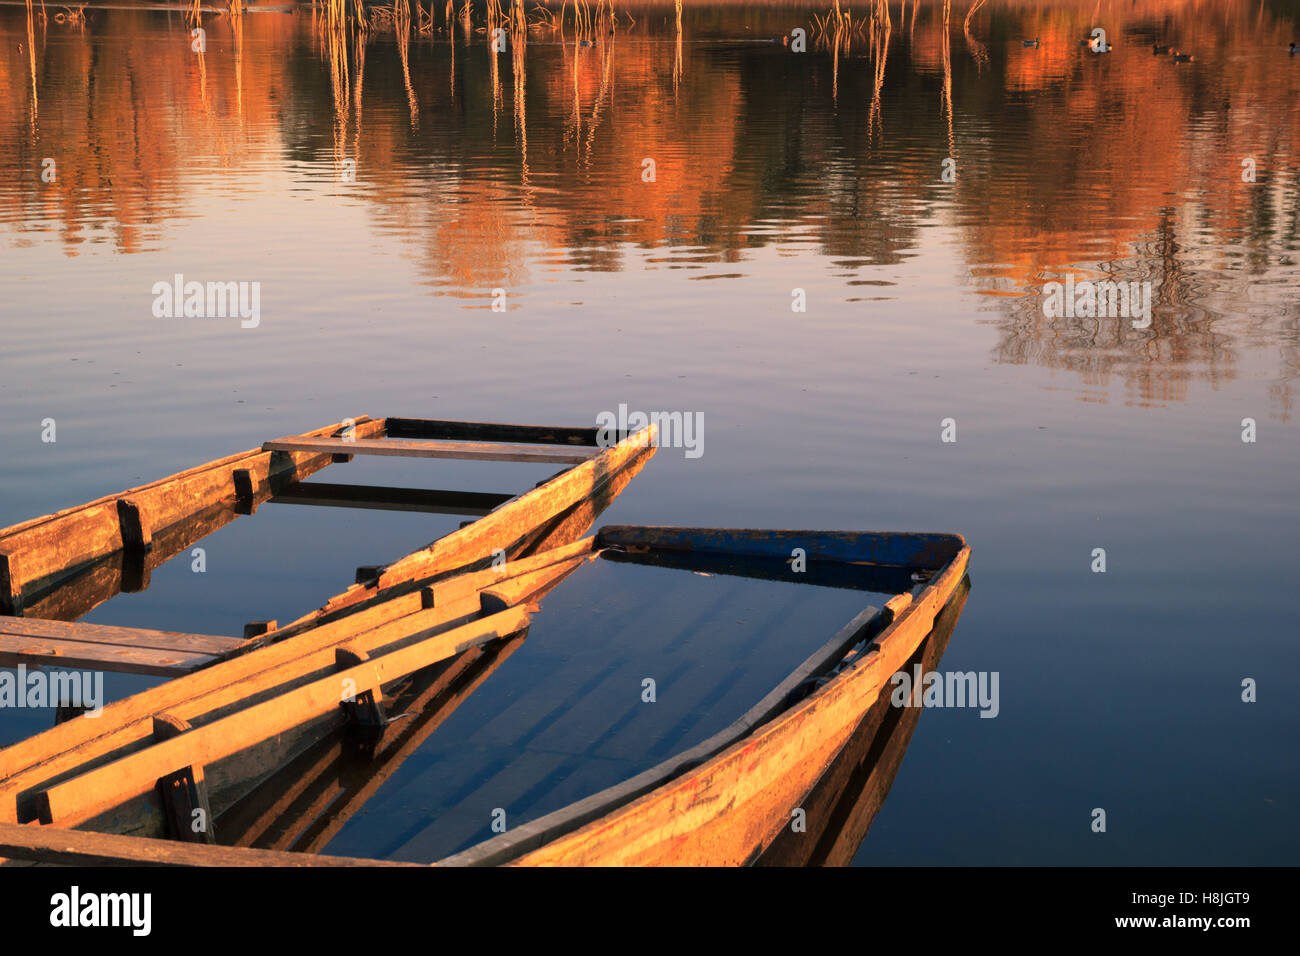 Wooden fishing boats at sunset on river or lake Stock Photo